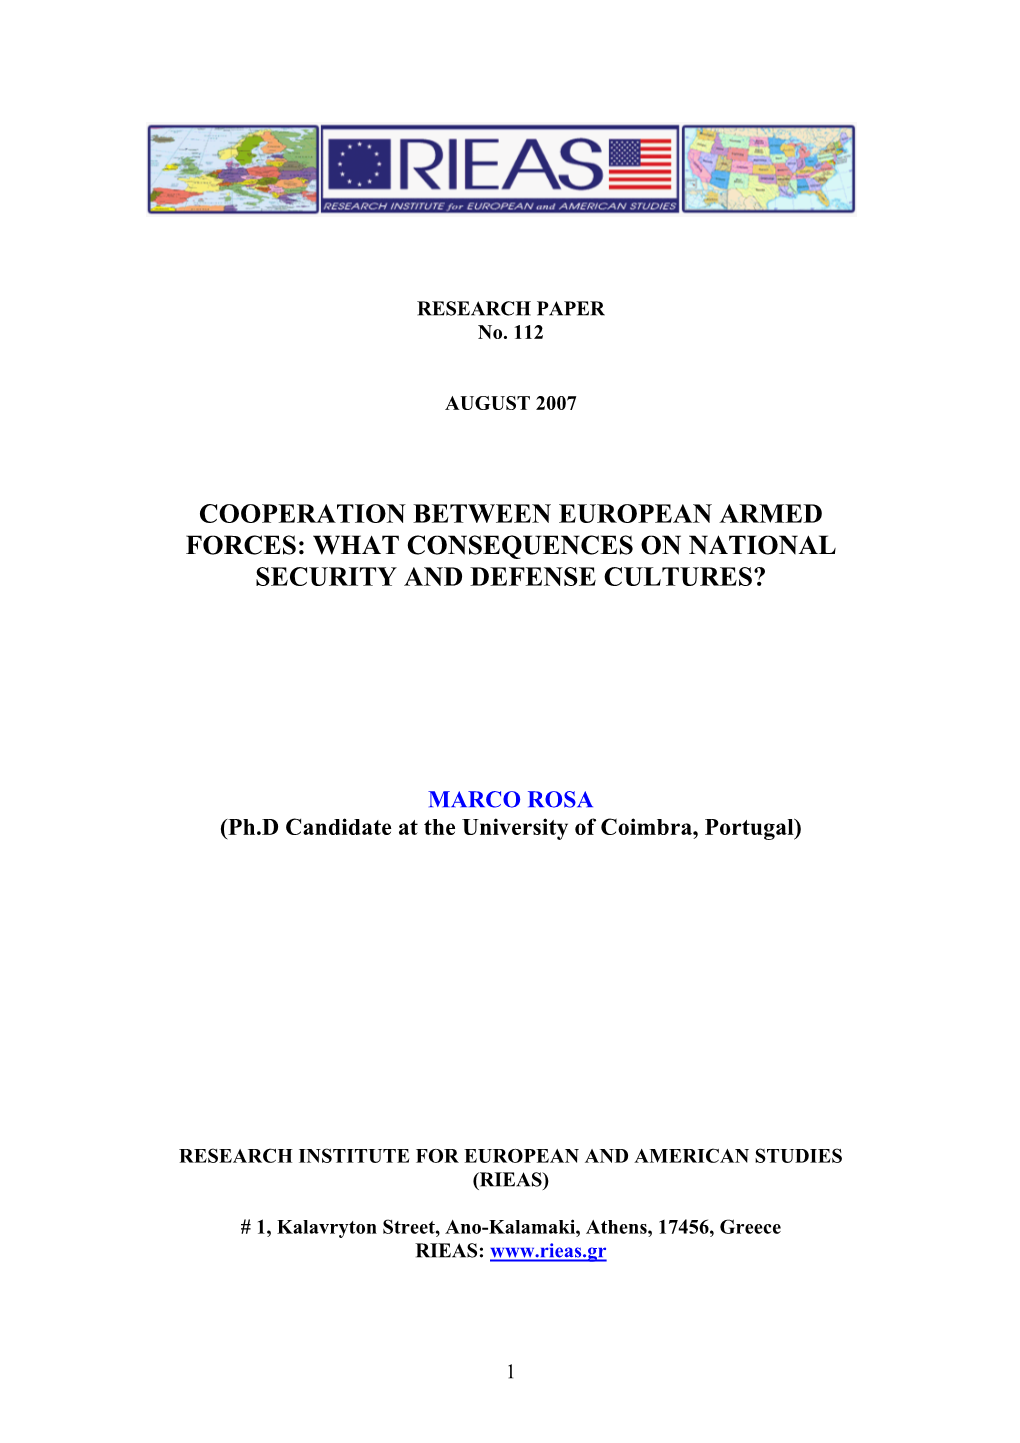 Cooperation Between European Armed Forces: What Consequences on National Security and Defense Cultures?